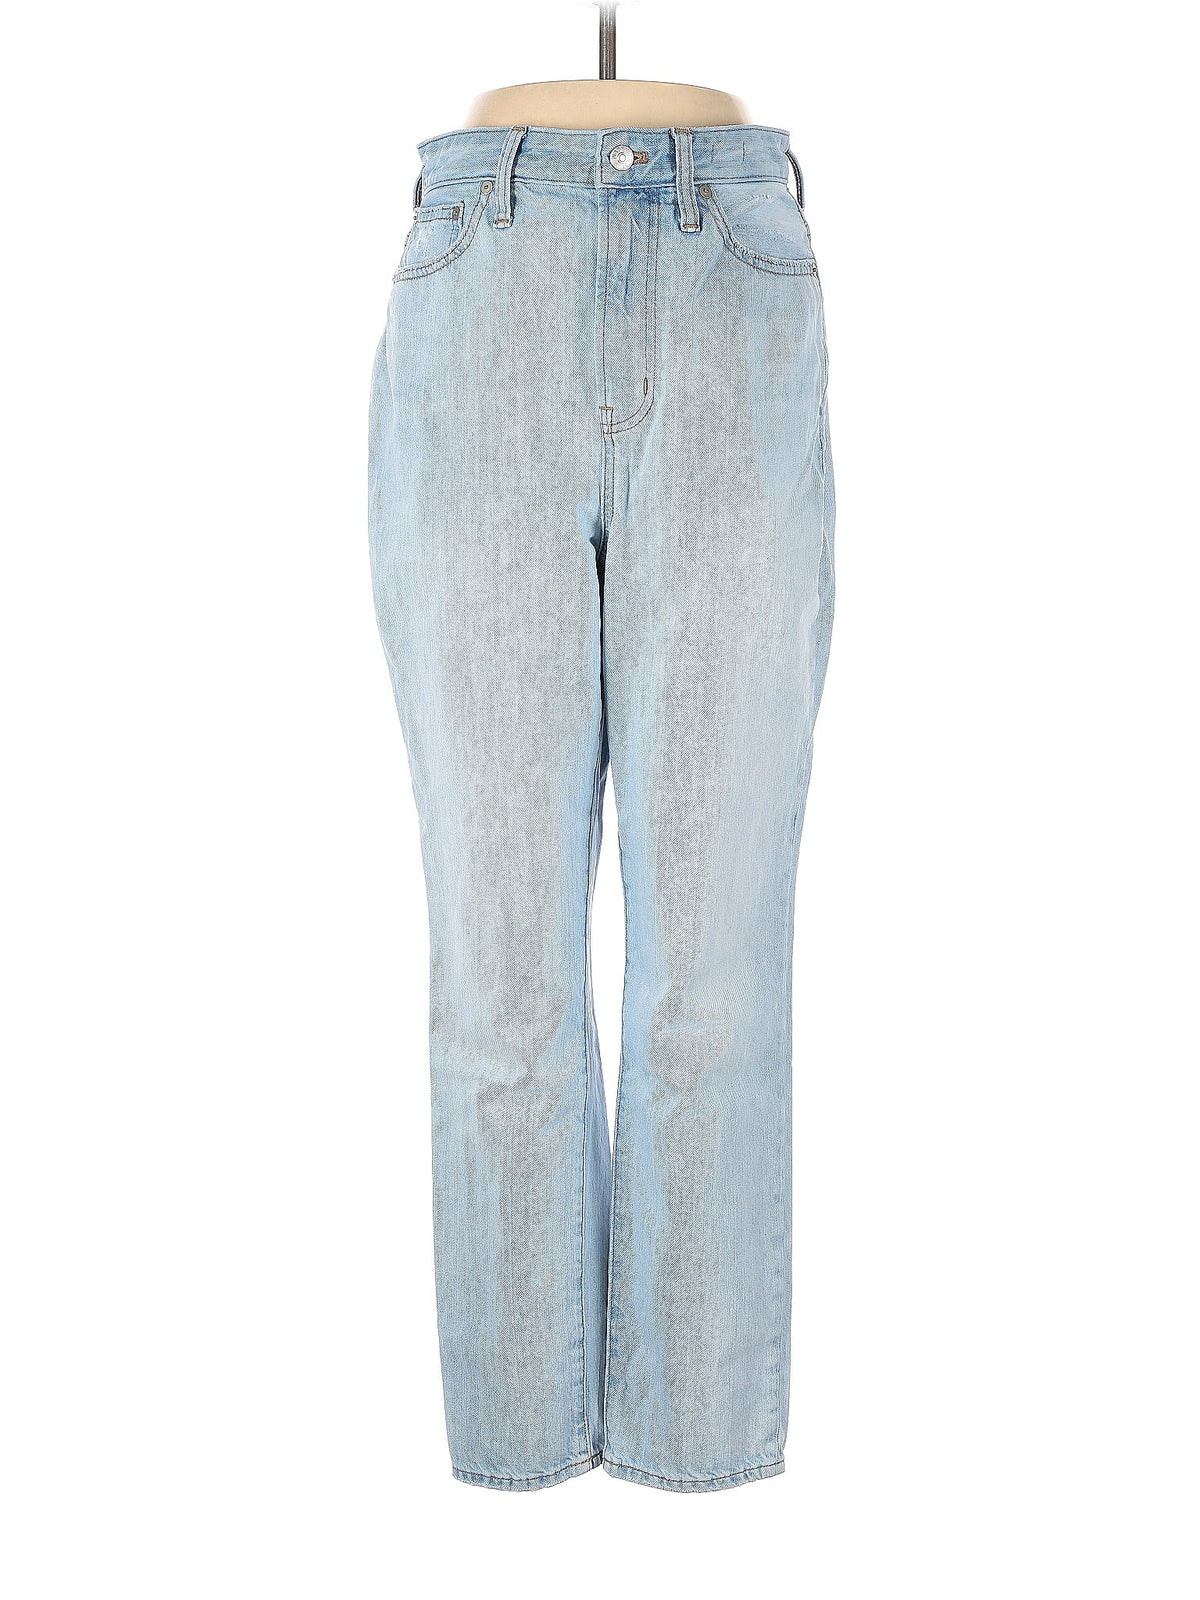 High-Rise Wide-leg Jeans in Light Wash waist size - 27